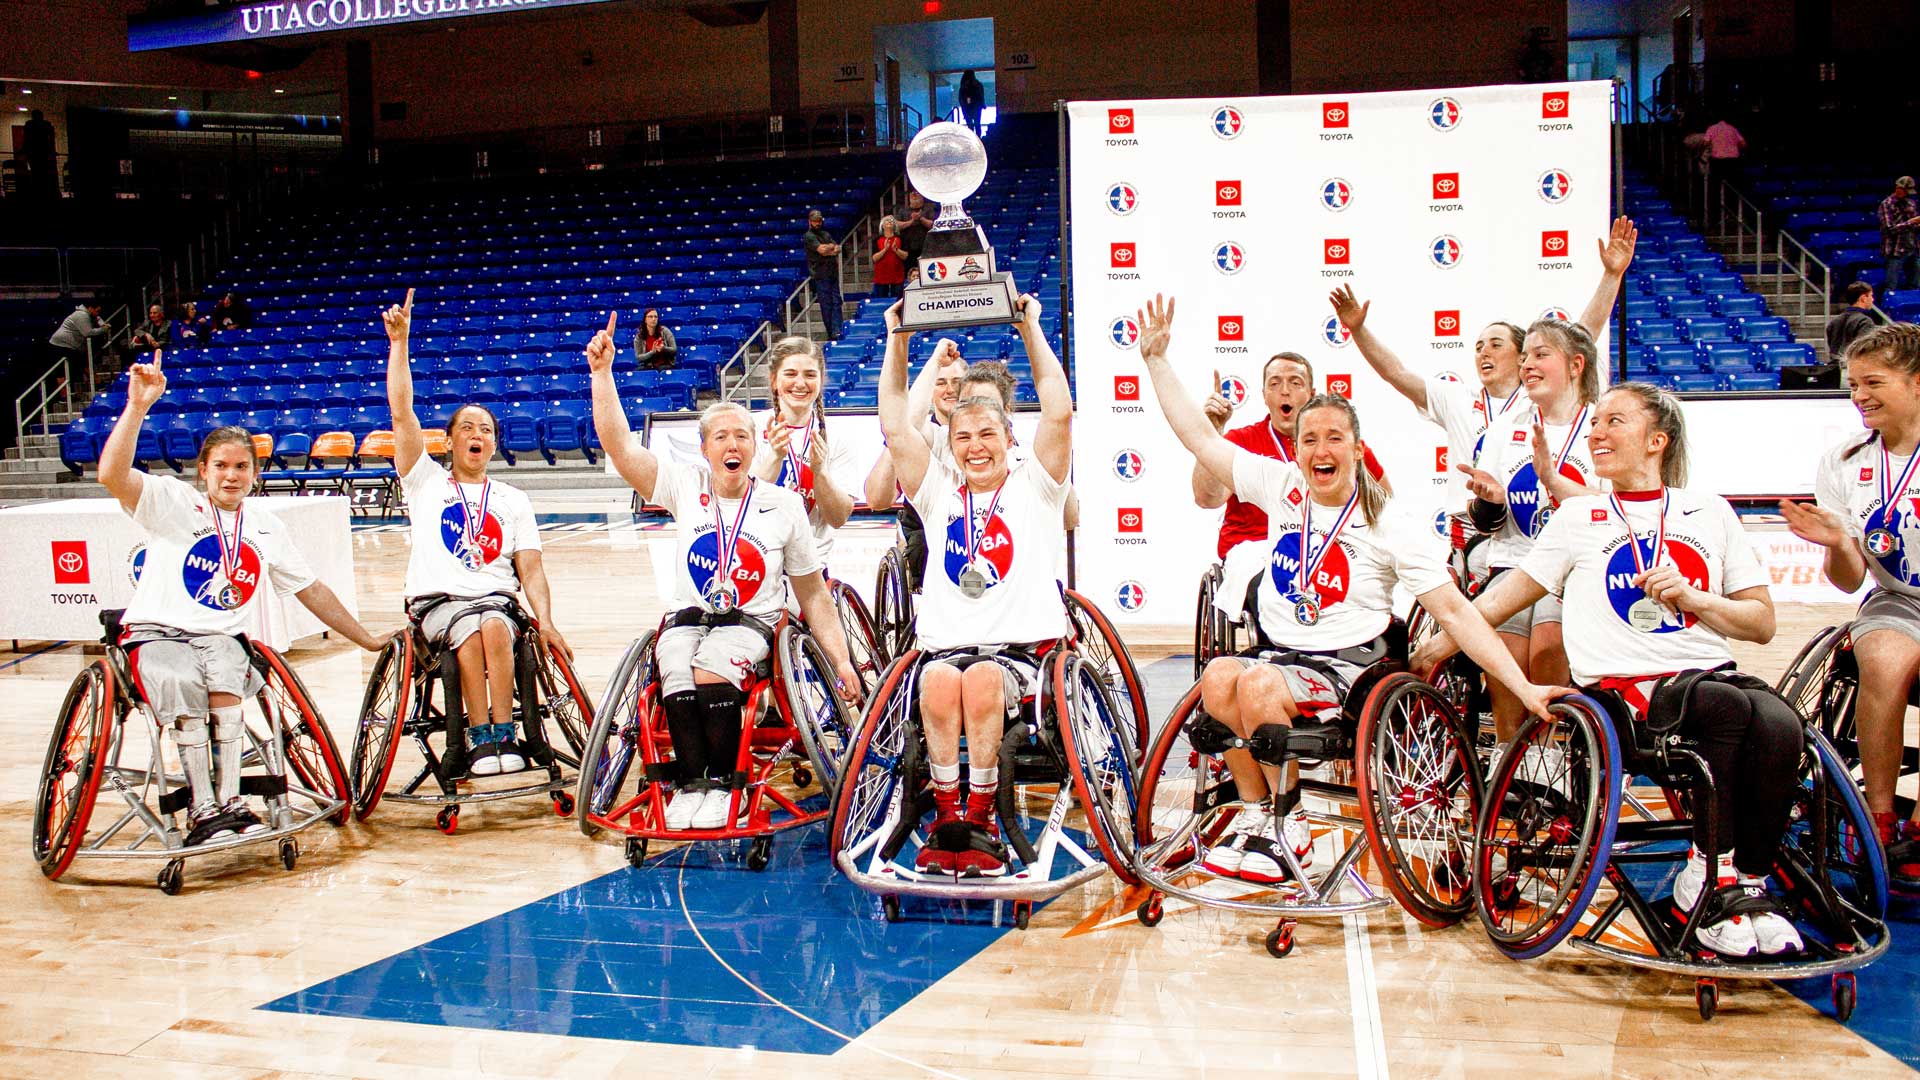 The women's wheelchair basketball team celebrates their victory on the court by raising the trophy